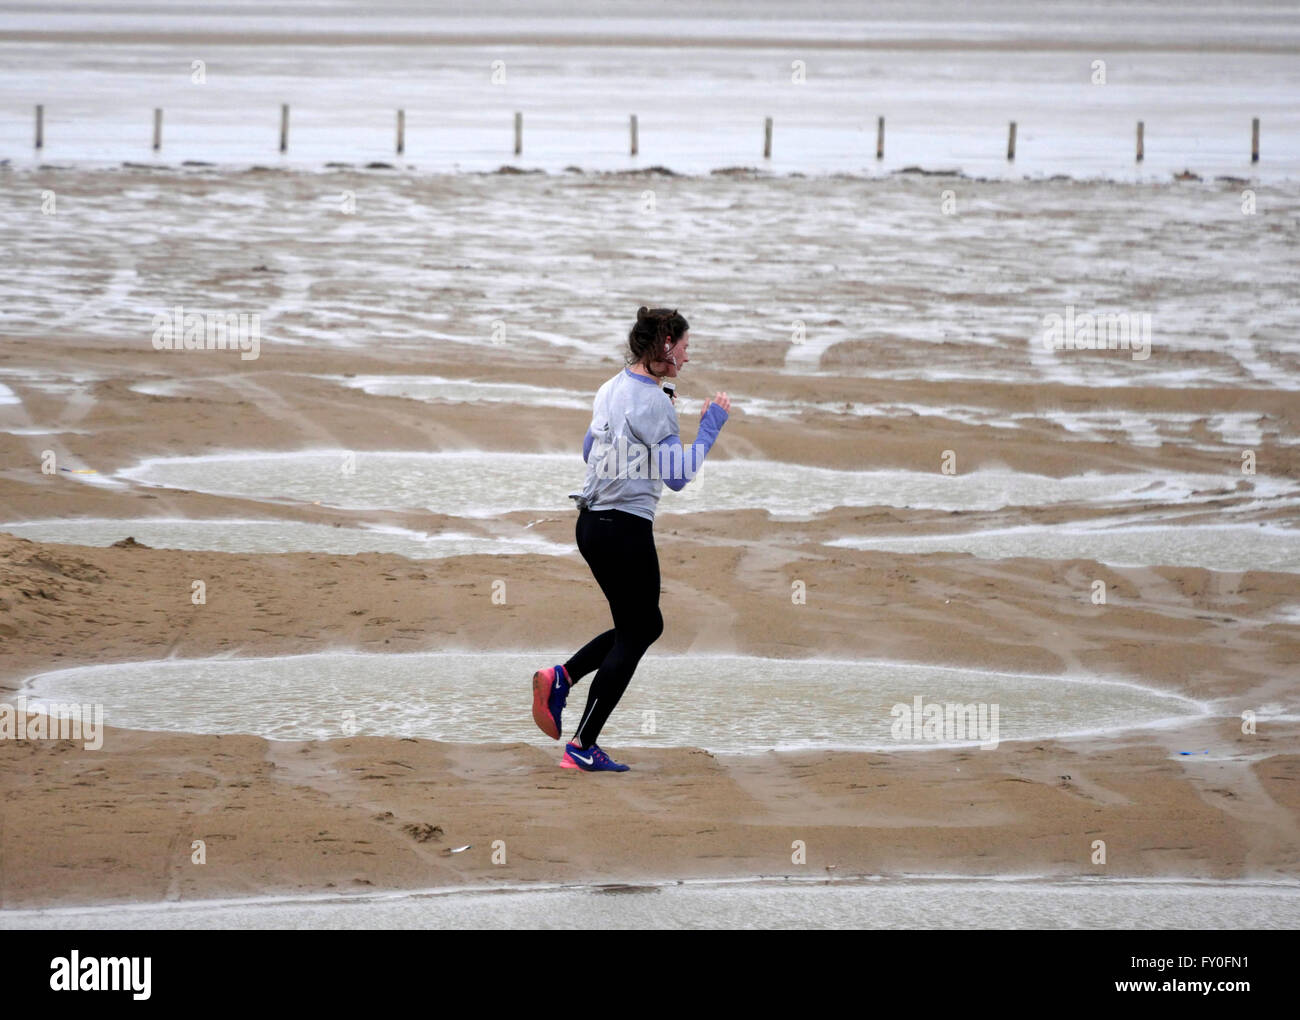 UK Weather Cold changeable  Spring day Ainsdale Beach Merseyside.6 April 2016. Cold, windy changeable  conditions on Ainsdale Beach. © Alan Edwards/Alamy Live News Stock Photo